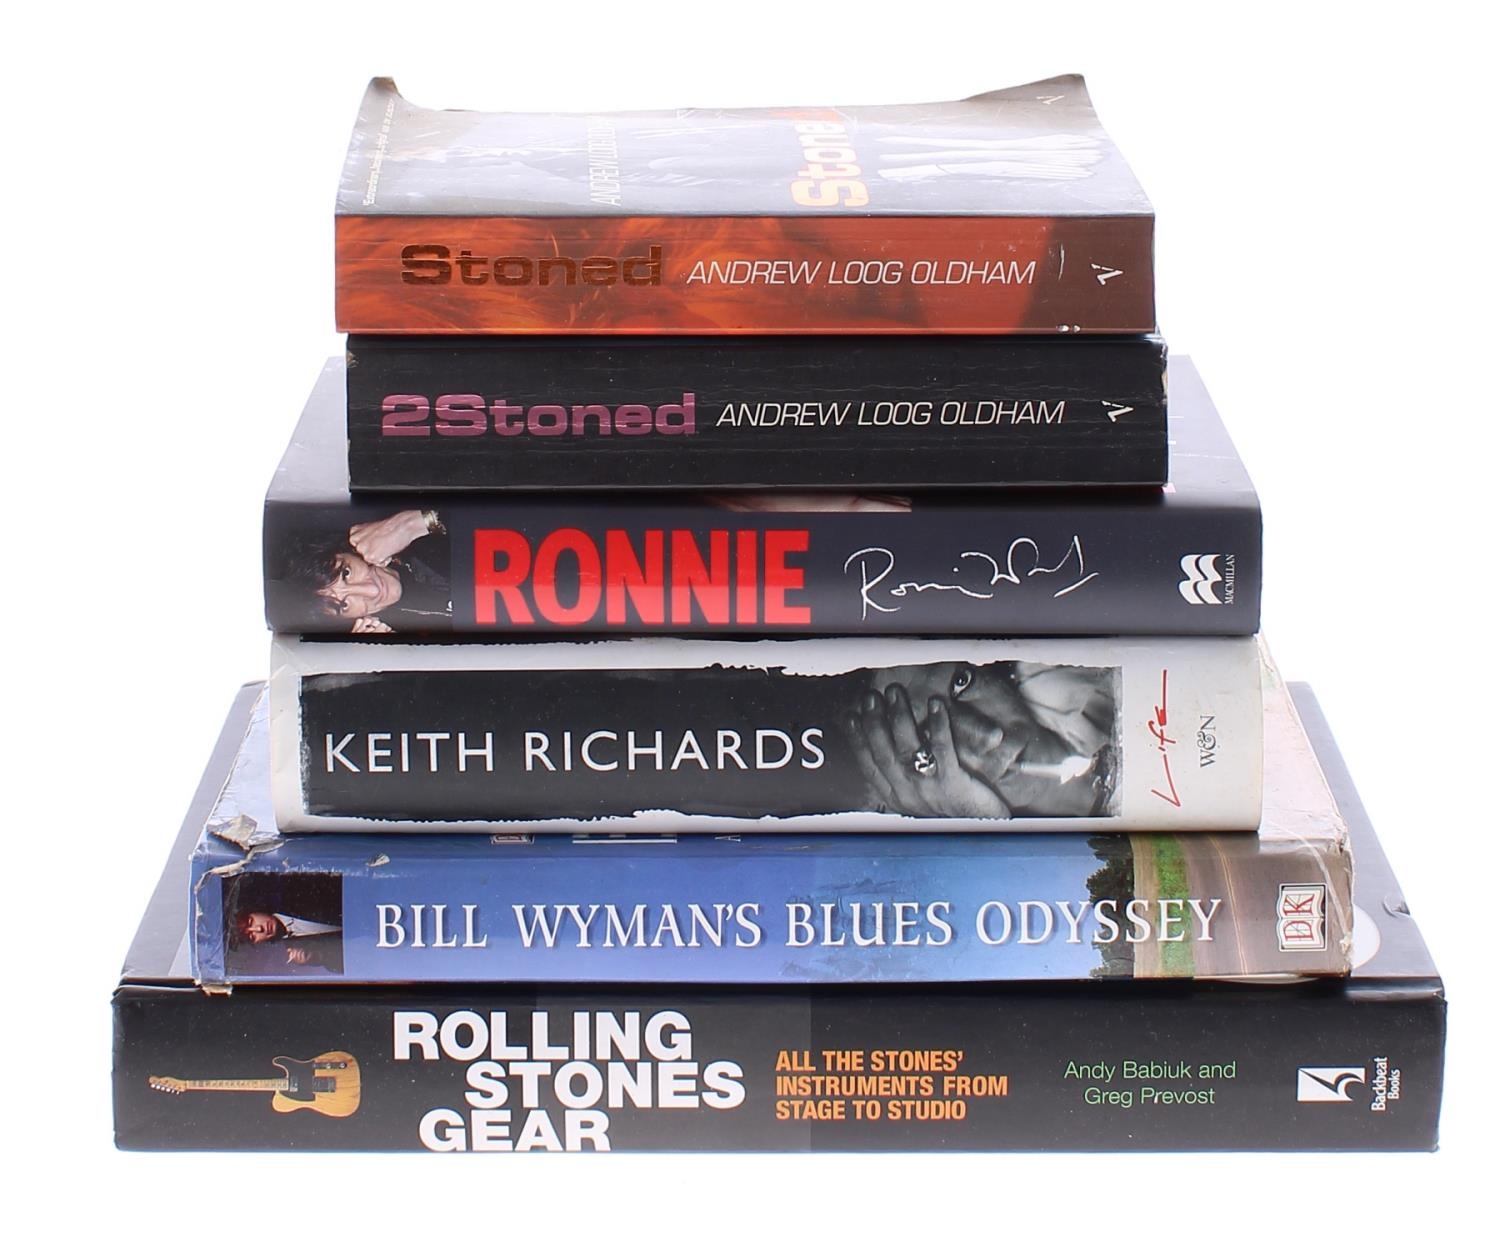 The Rolling Stones - six books relating to The Rolling Stones including Andy Babuik's 'Rolling